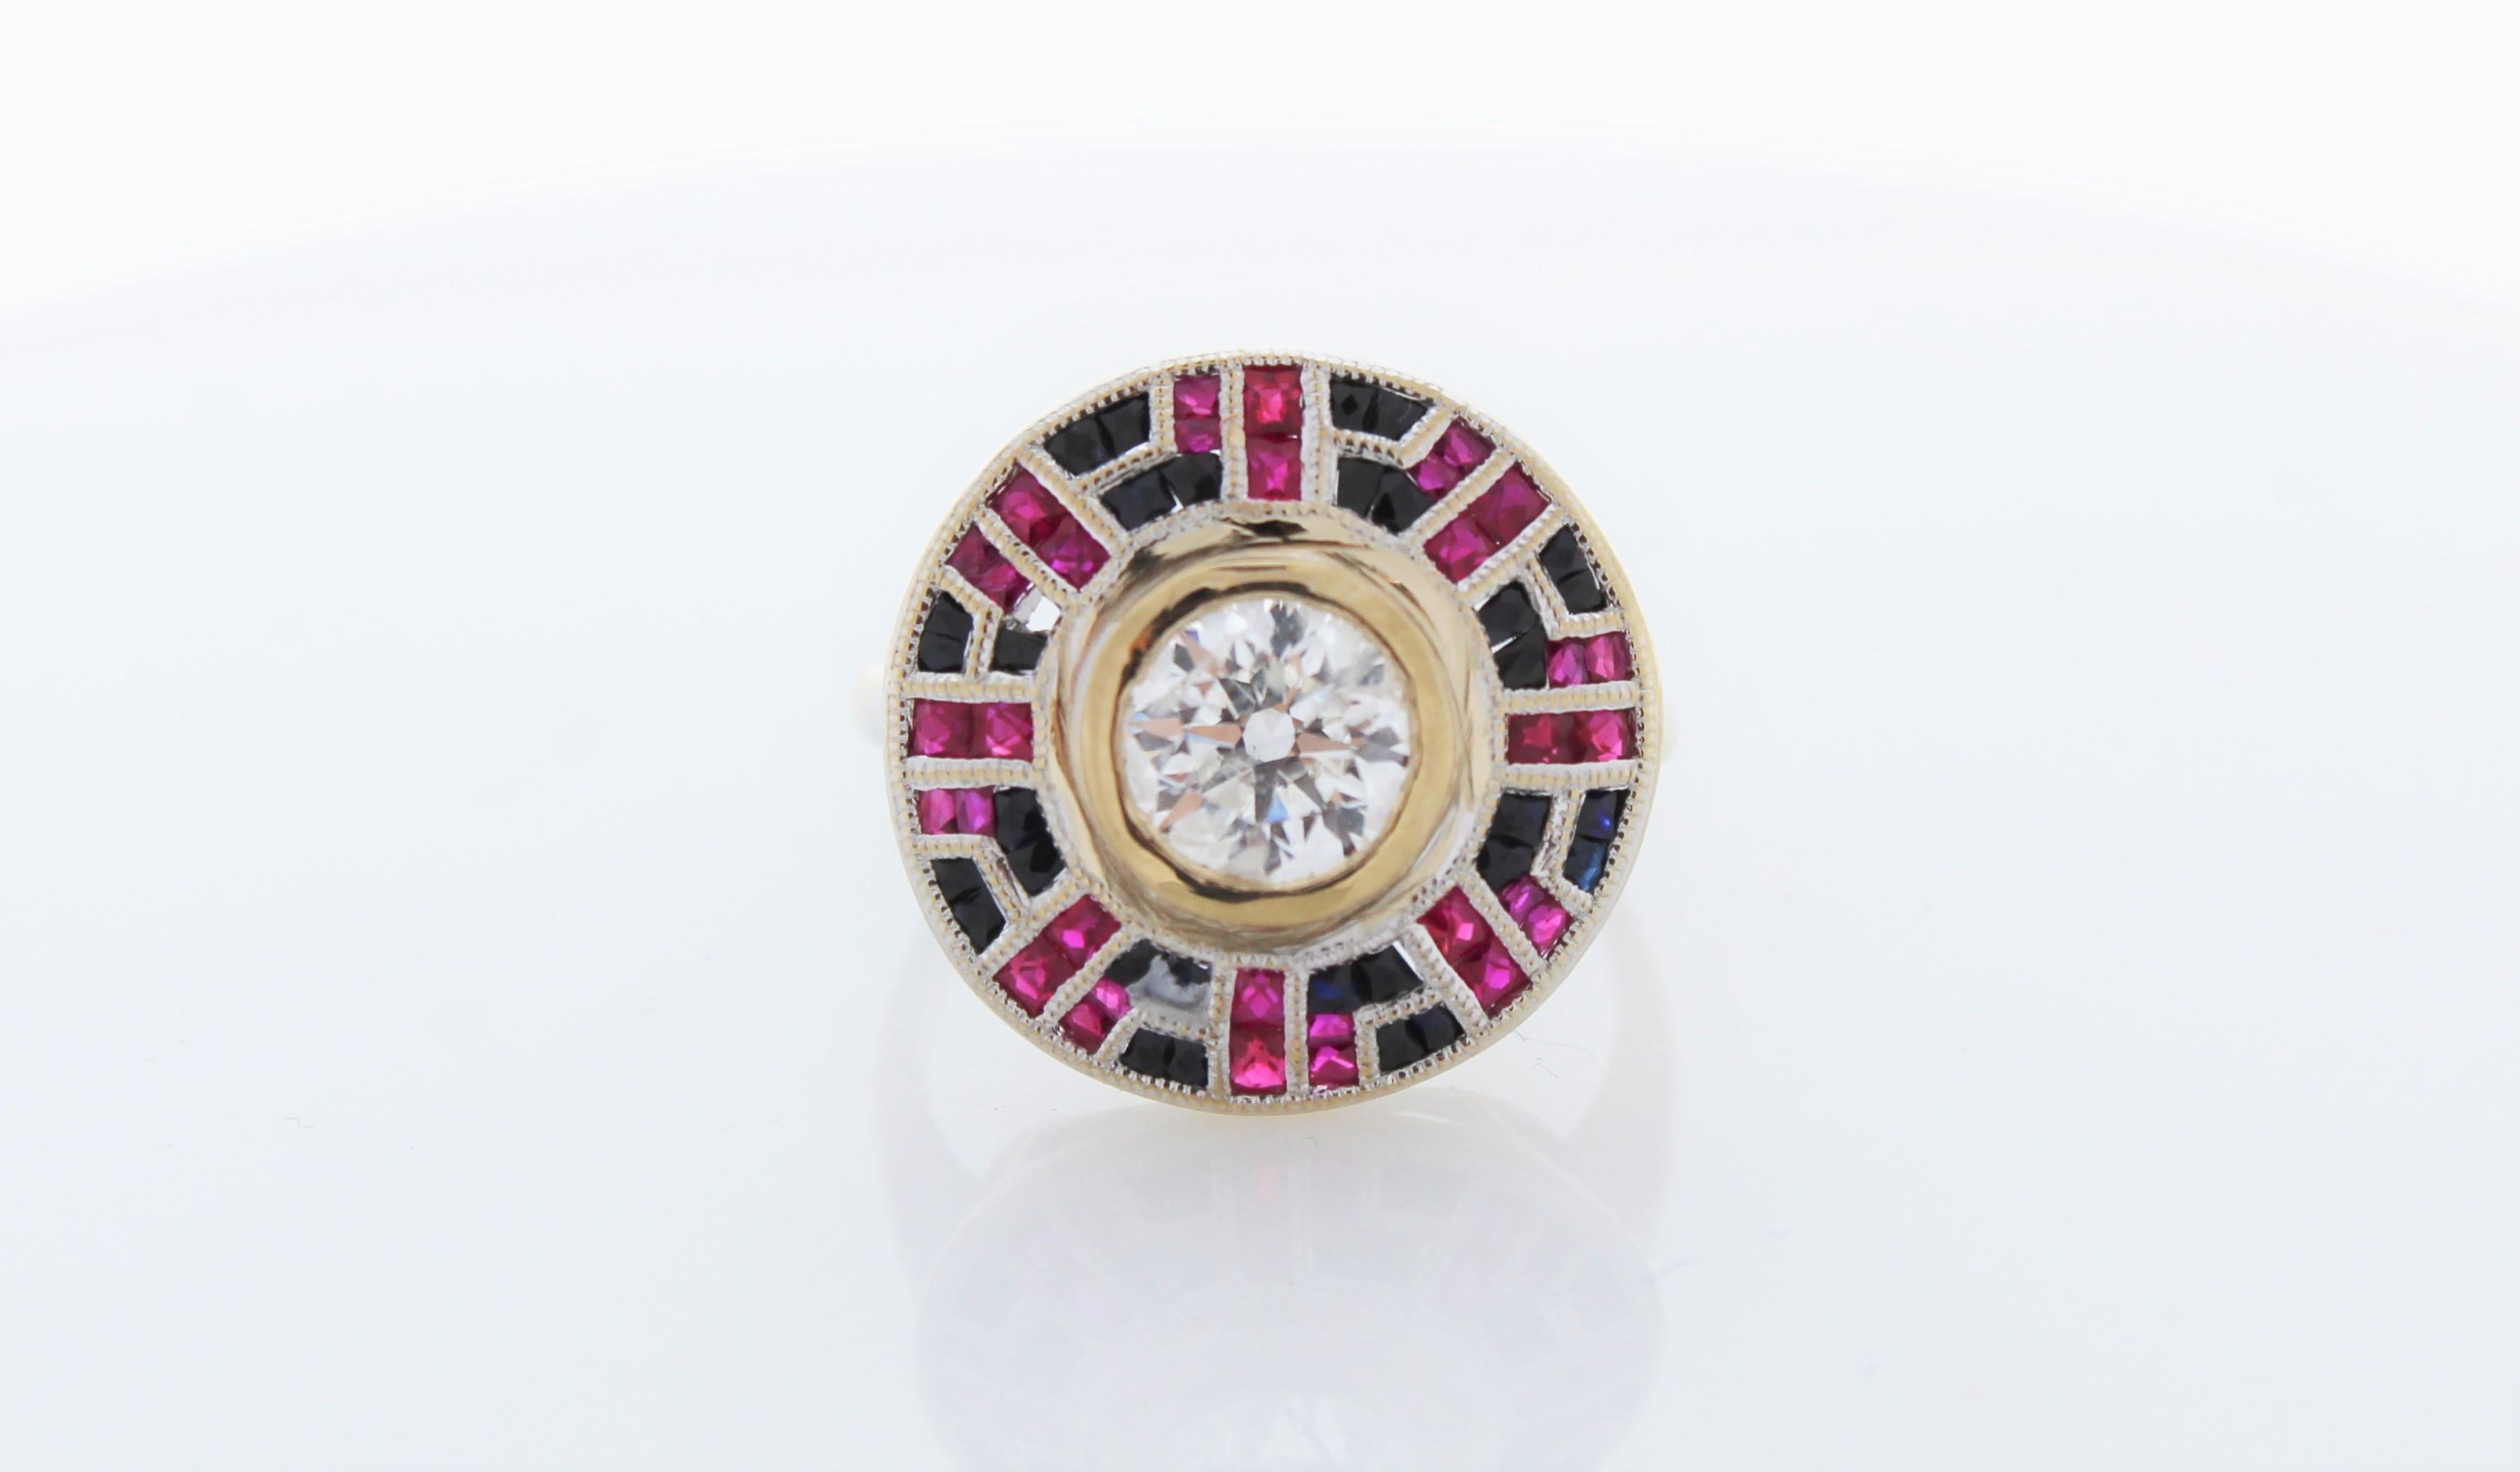 A bright and brilliant vintage round brilliant cut diamond, weighing one-and-a-quarter-carats, fills a vibrant royal blue frame of calibre-cut sapphires and burgundy red rubies in this classic Art Deco style 'jigsaw' or 'halo' ring, hand-fabricated